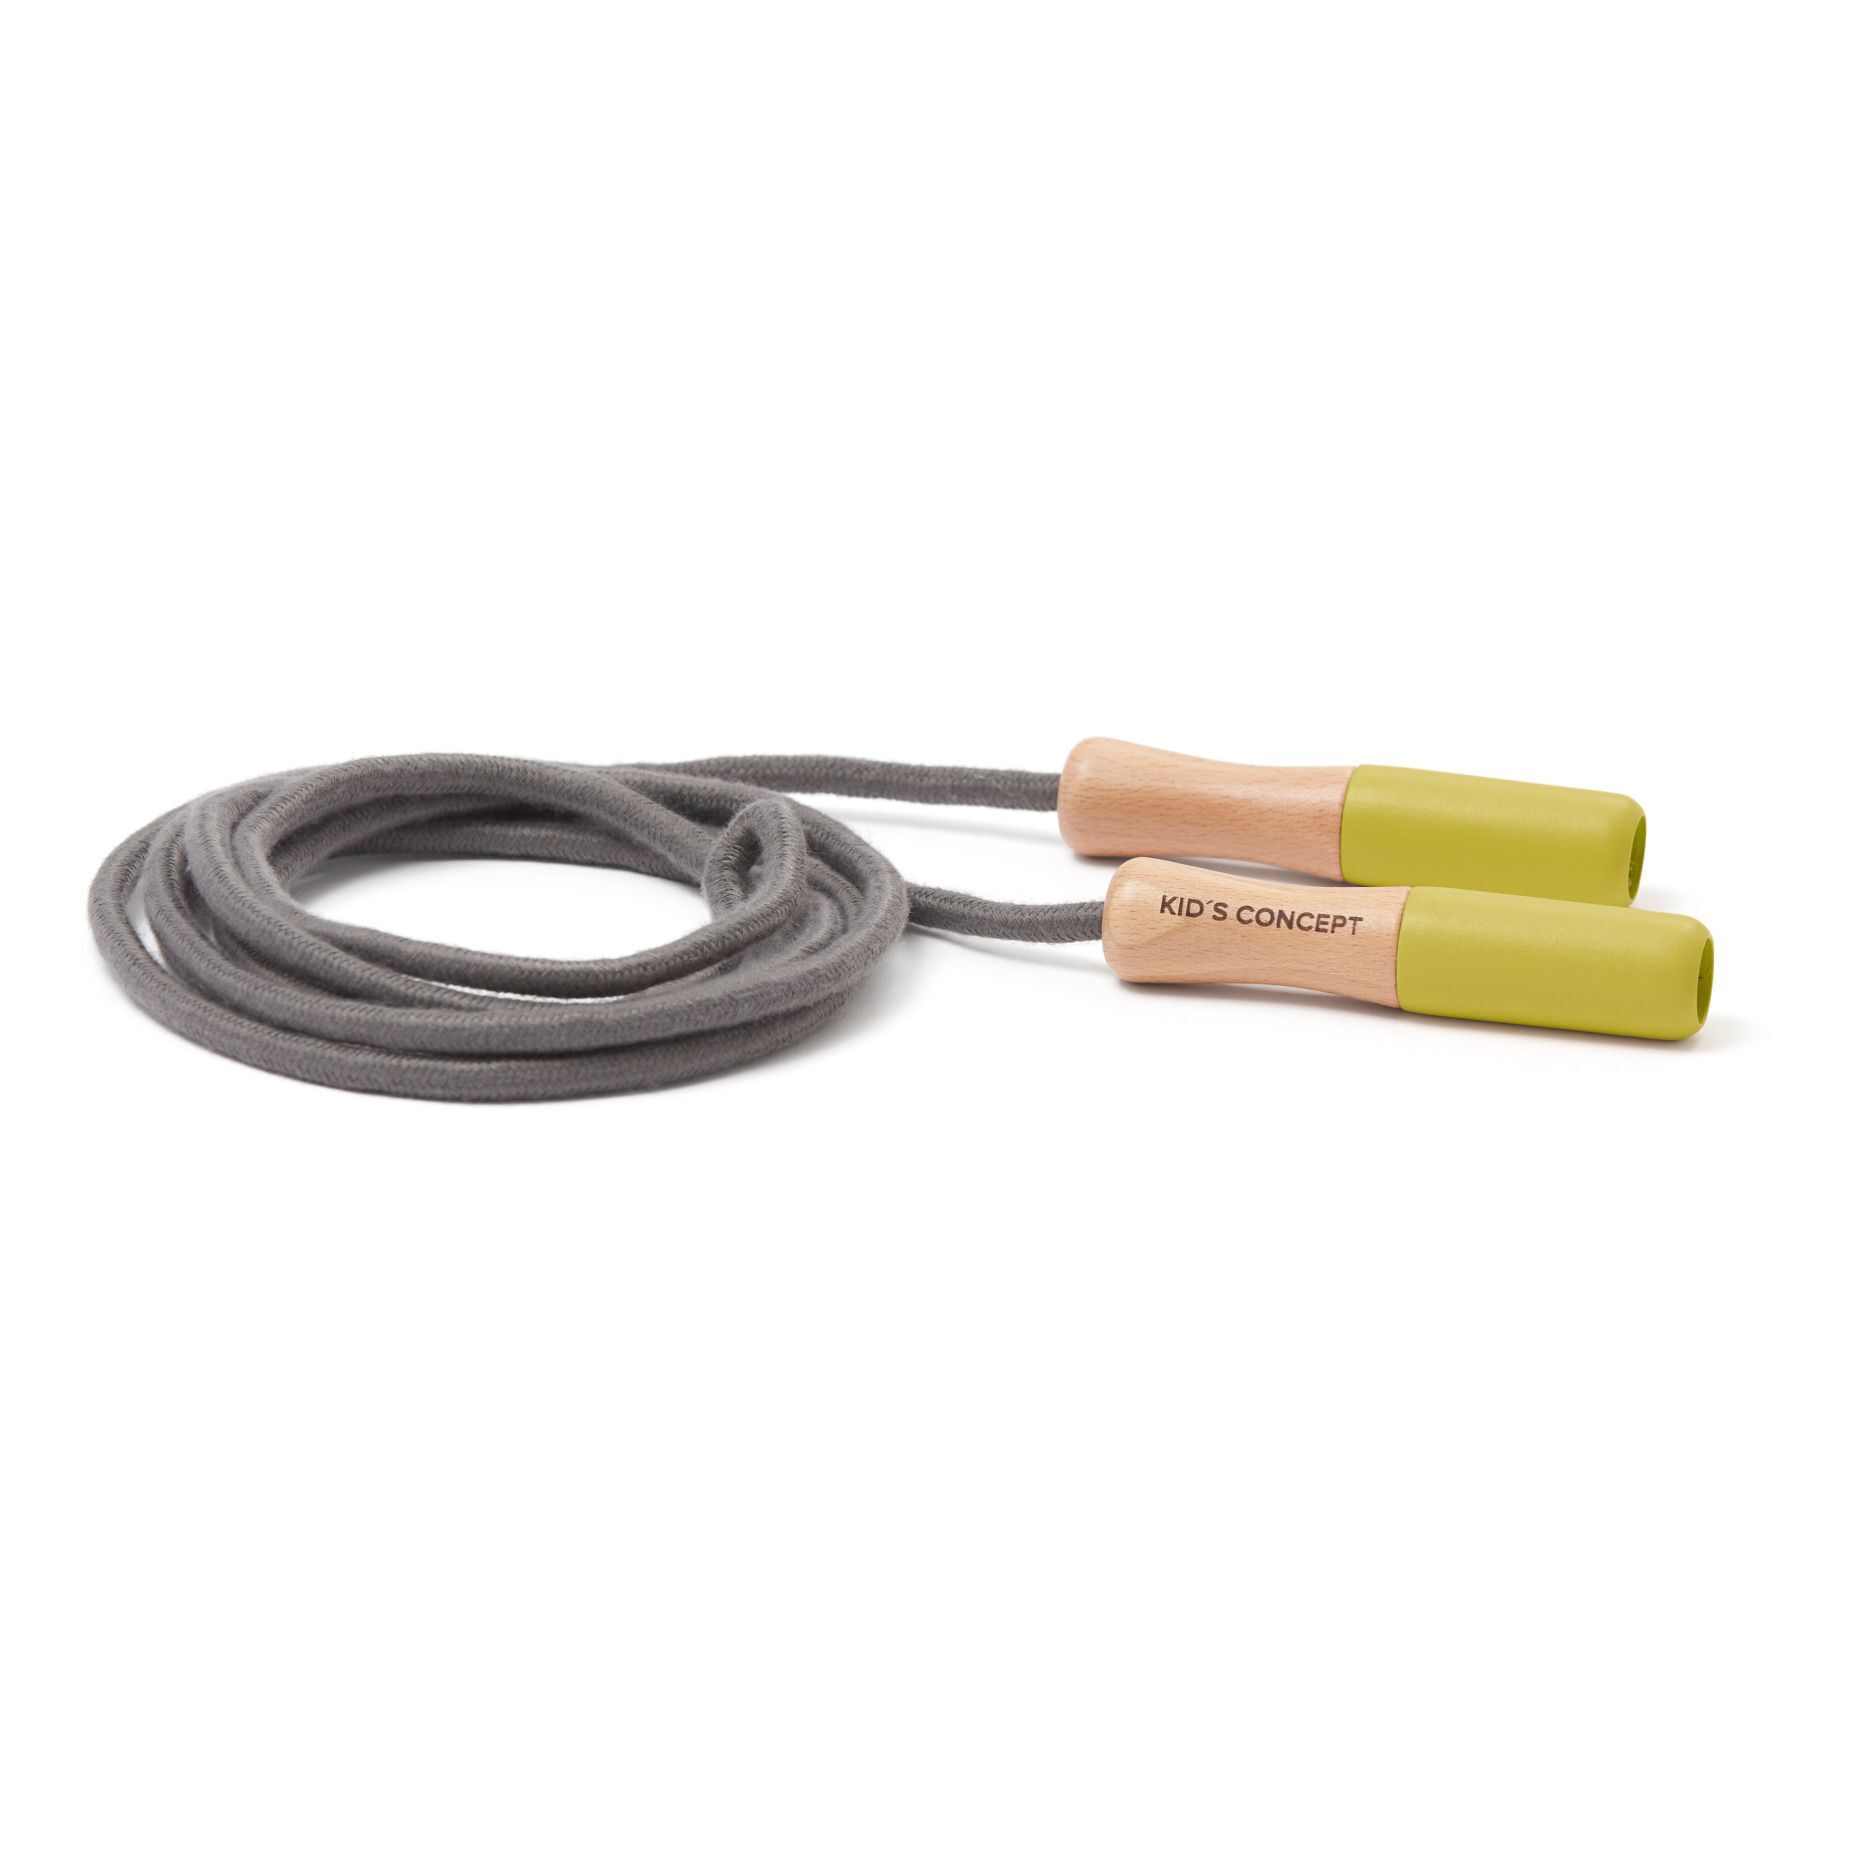 Kid's Concept Jump Rope Green one size unisex